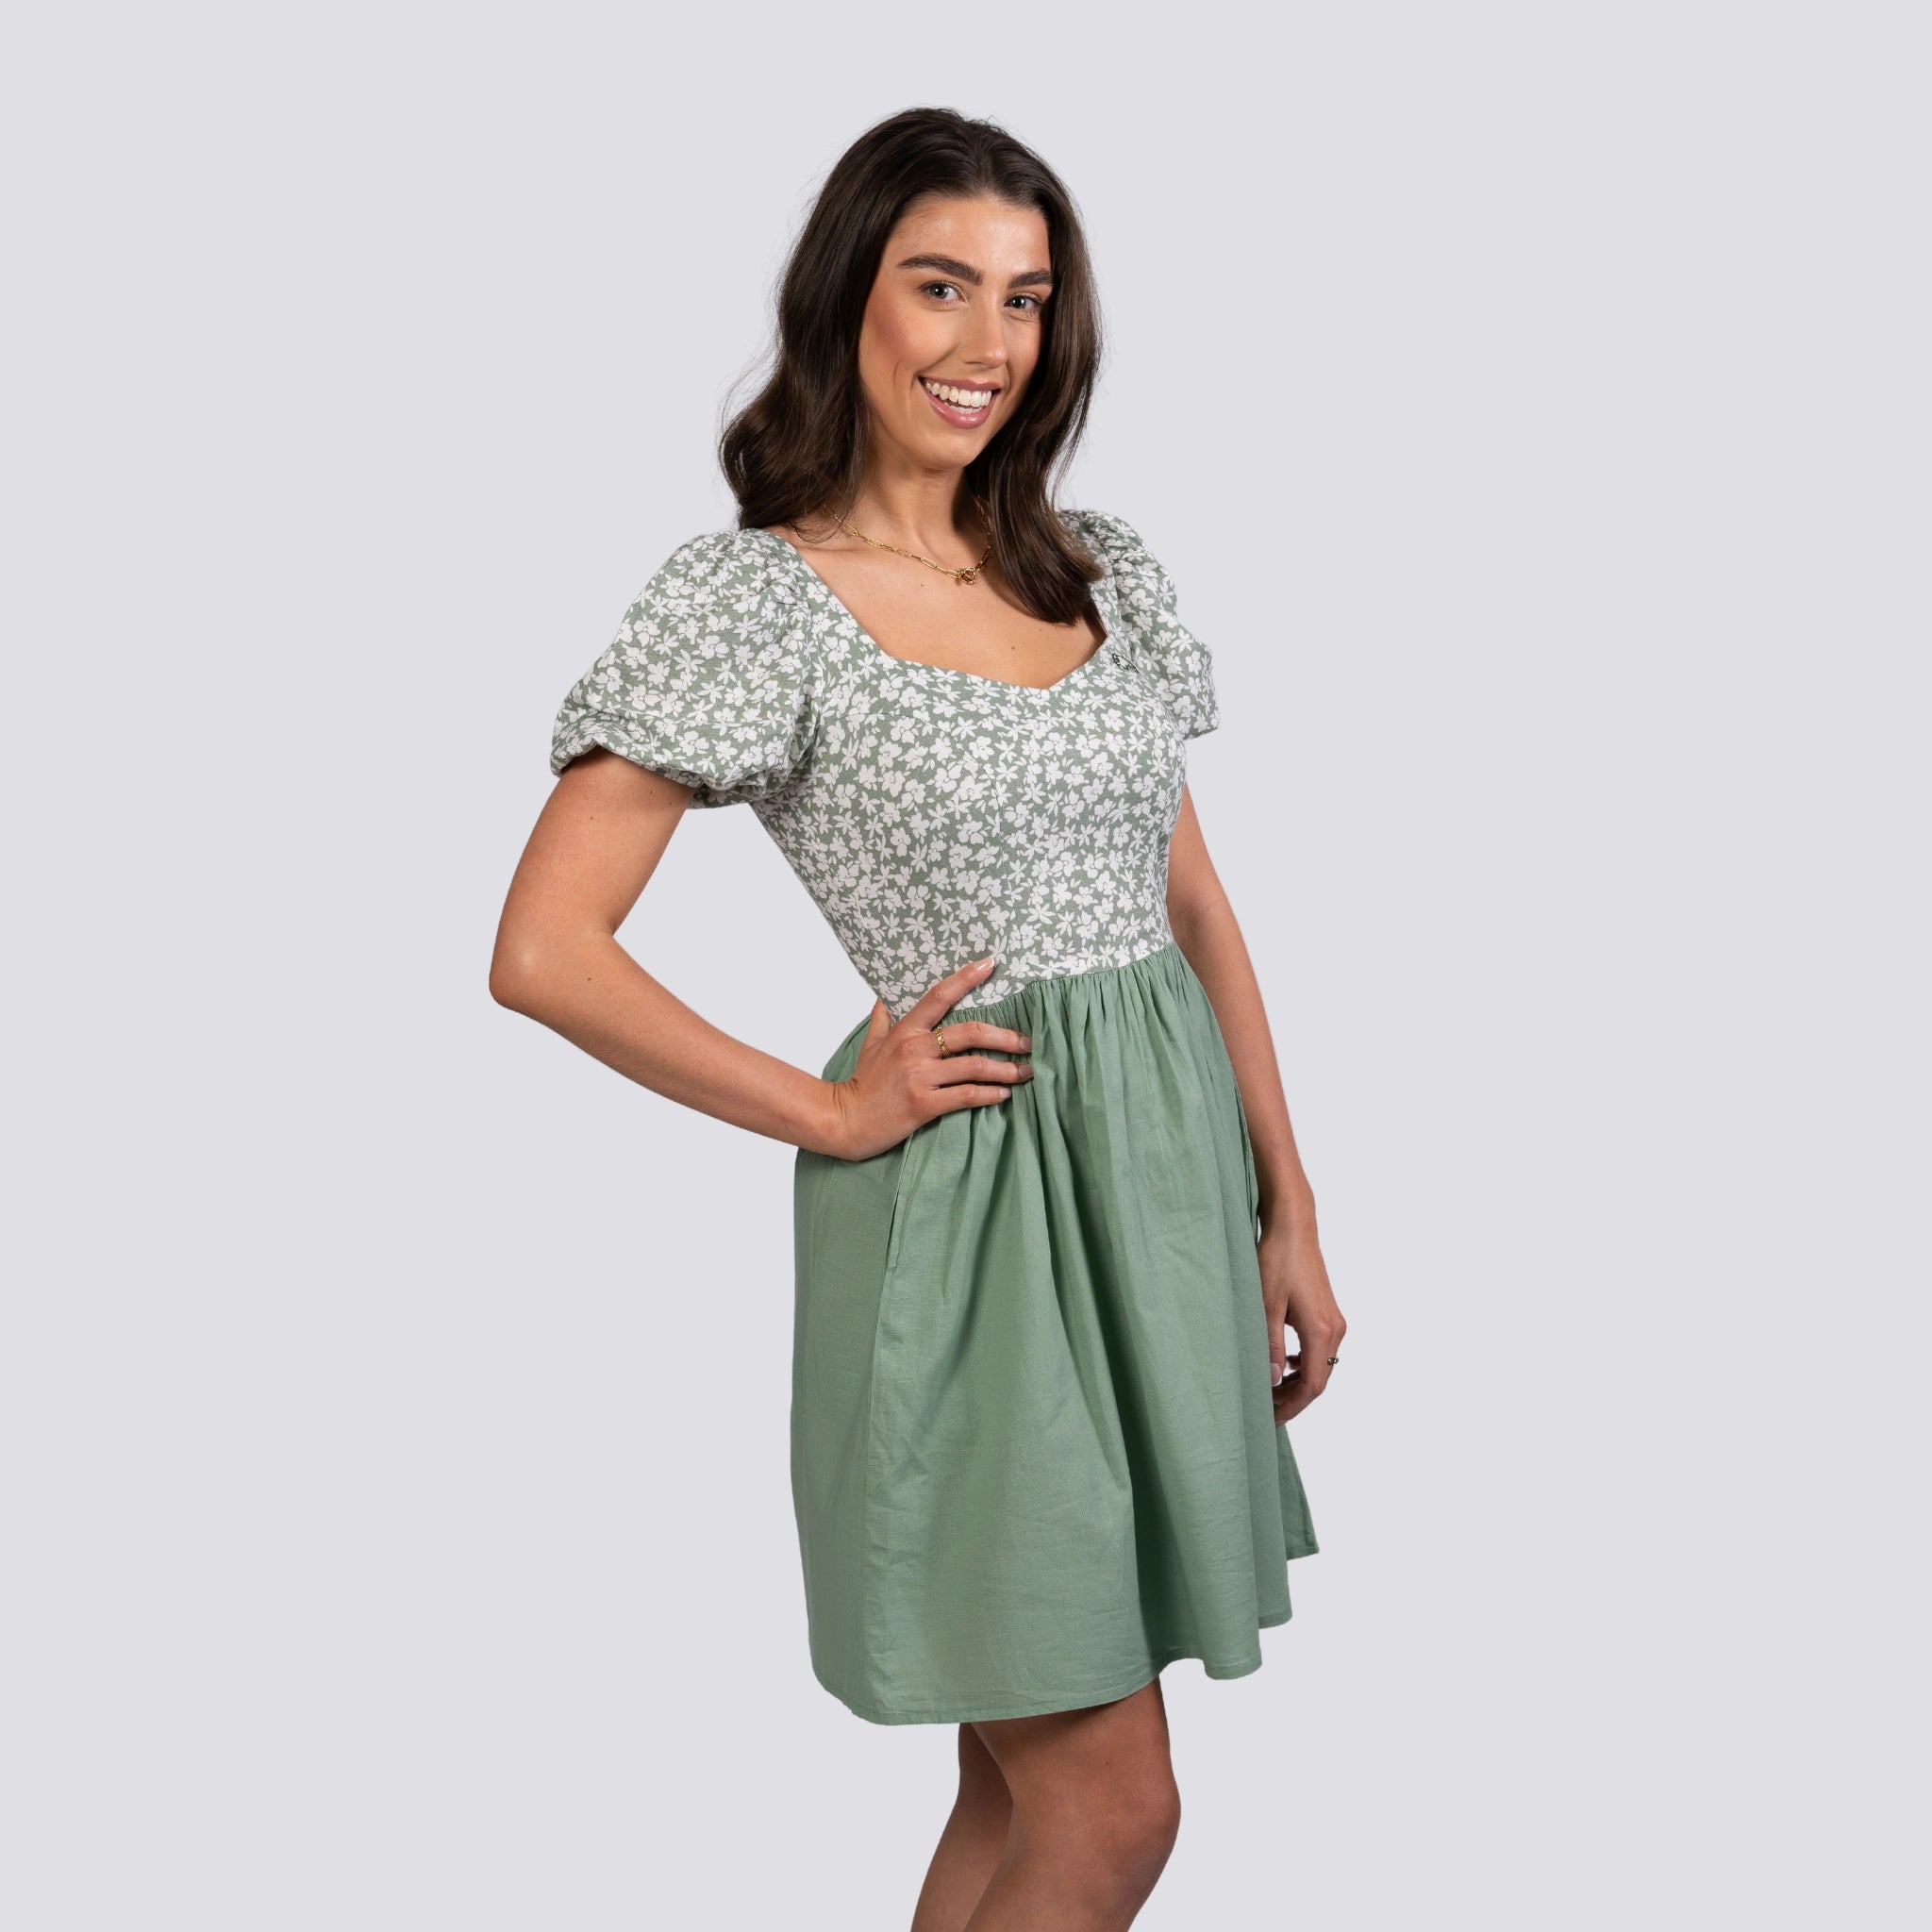 A woman in a Karee Sirocco Blooms Green Frock Dress smiles while posing with one hand on her hip against a gray background.